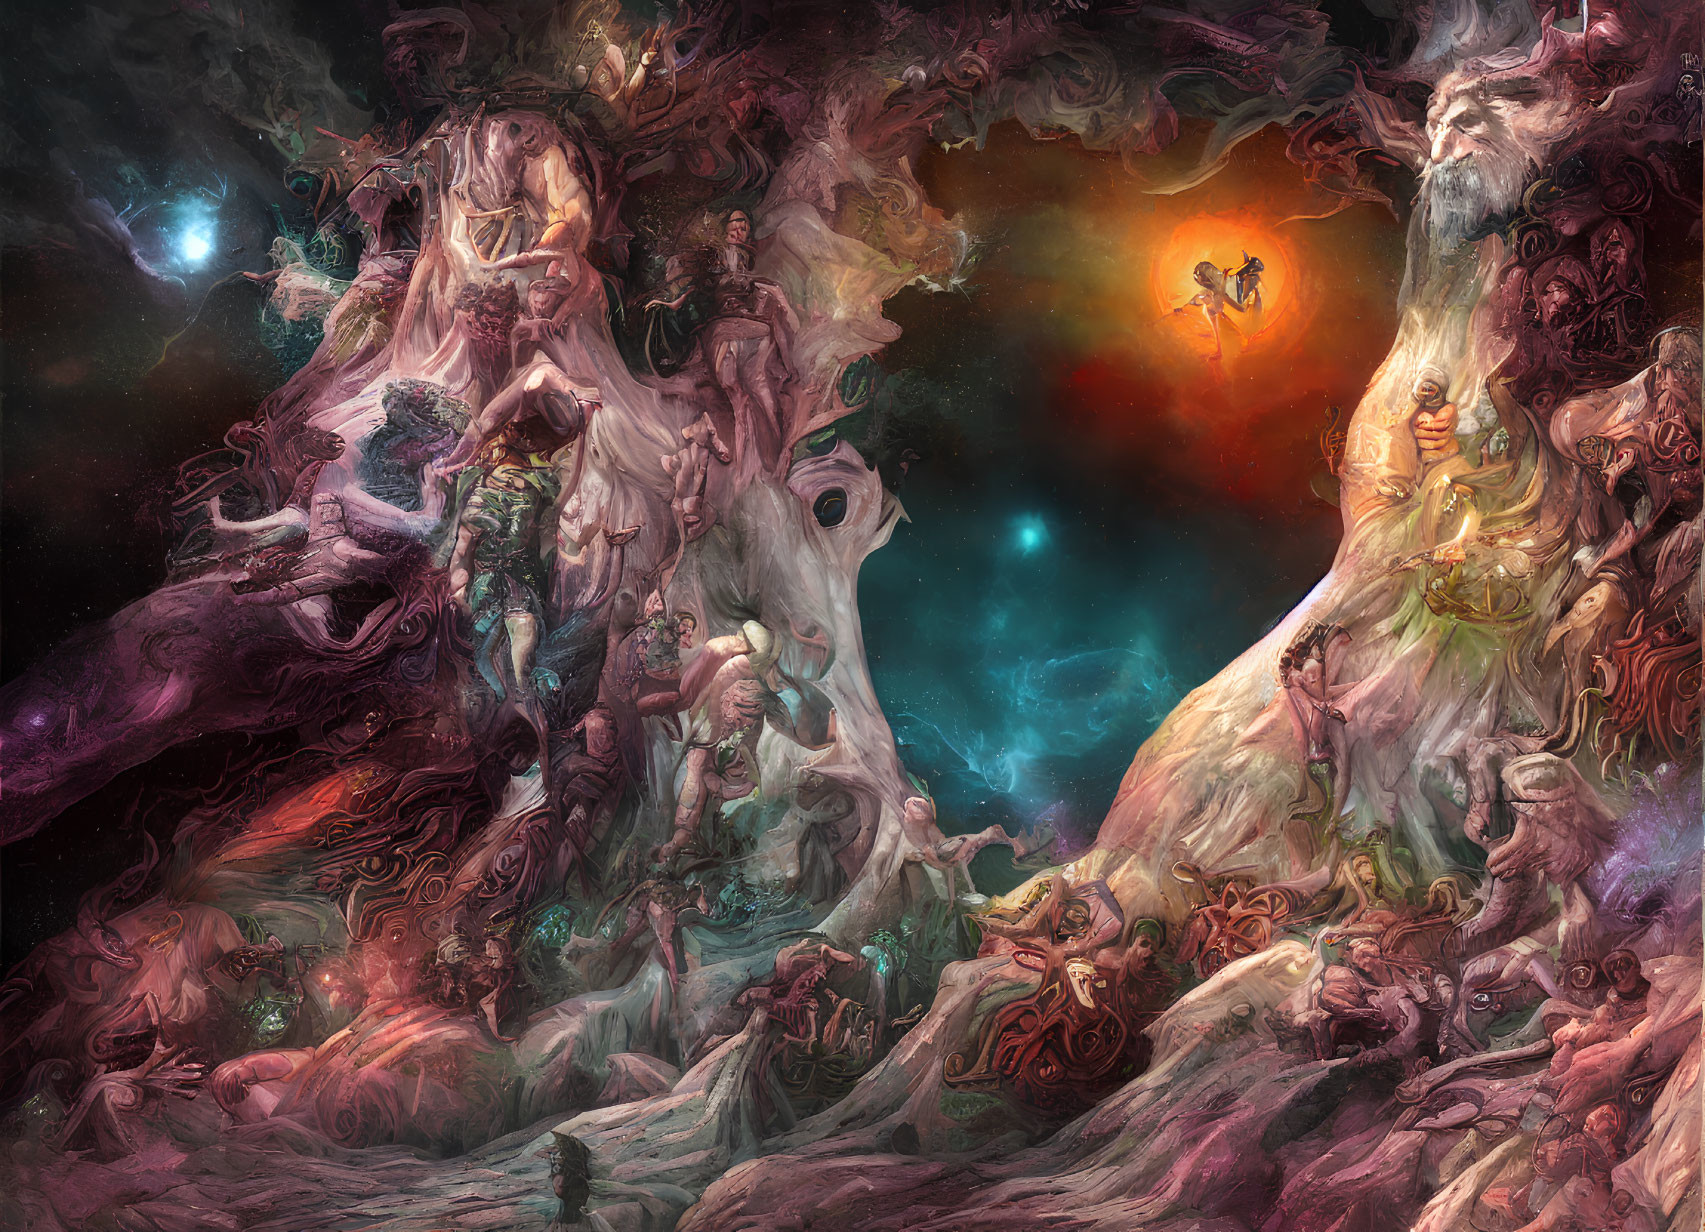 Colorful cosmic painting with intricate details of ethereal beings and structures.